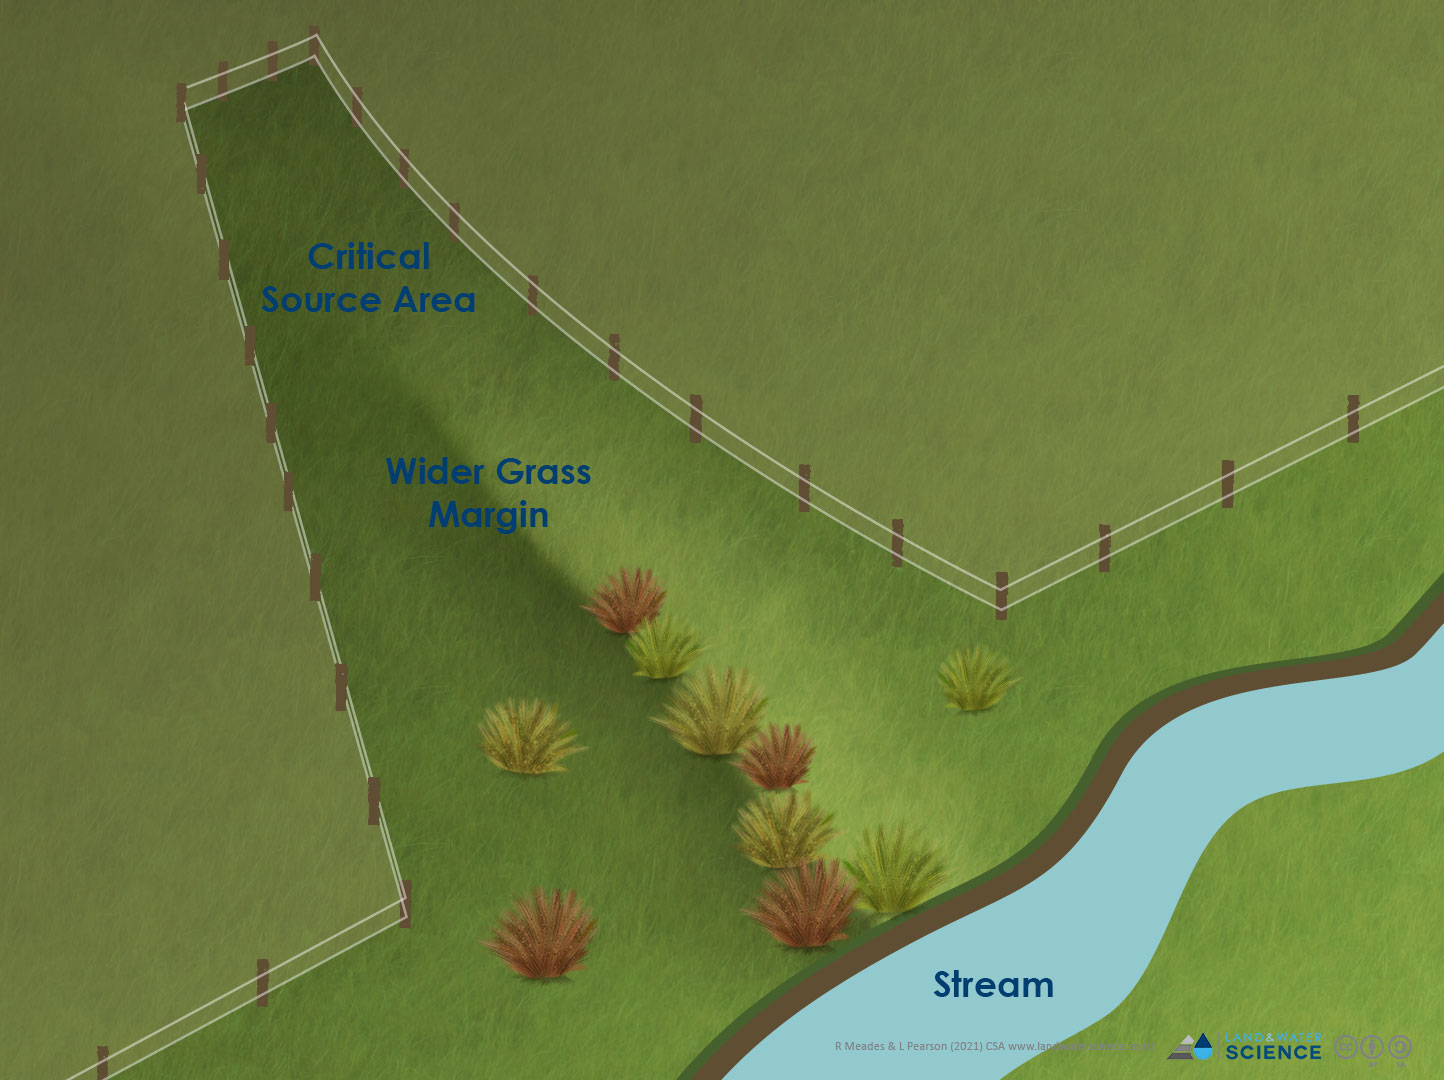 3D-render of a gully in a hillside (labeled 'critical source area') fenced off and planted out.